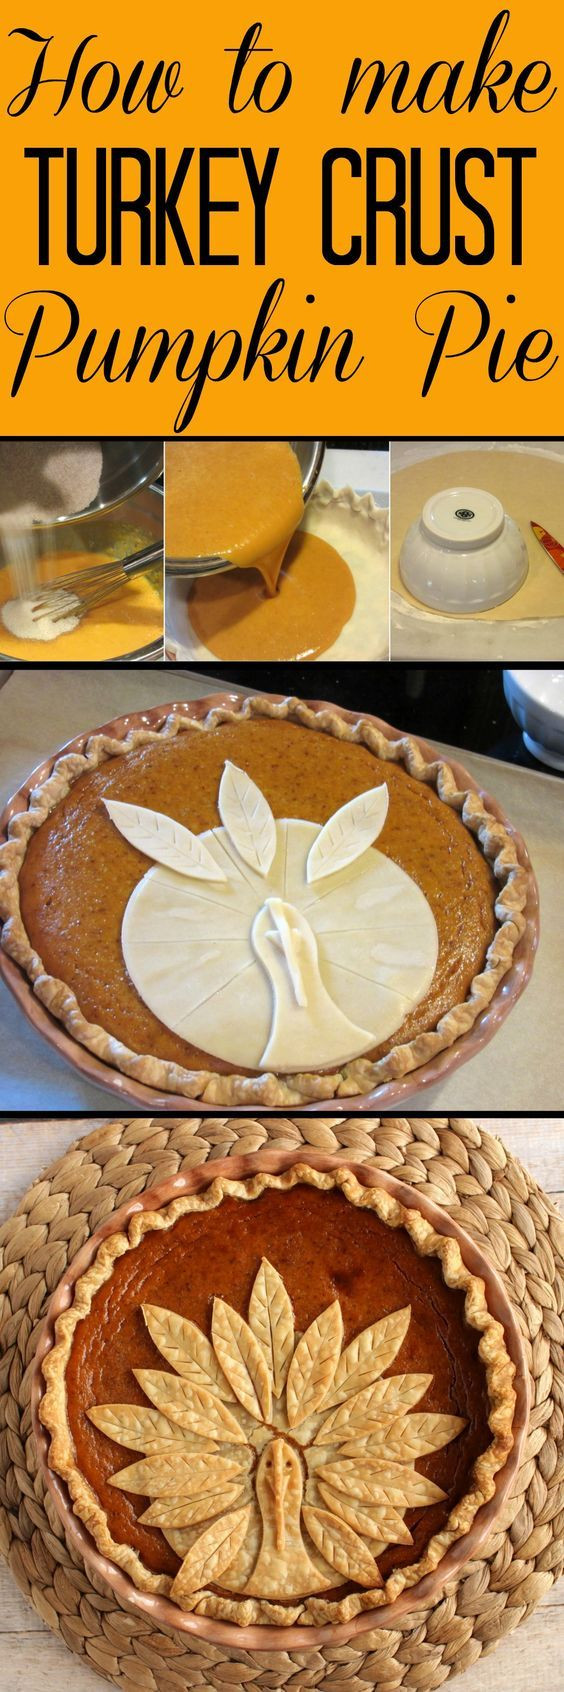 Holiday Desserts For Thanksgiving
 Best 20 Thanksgiving treats ideas on Pinterest